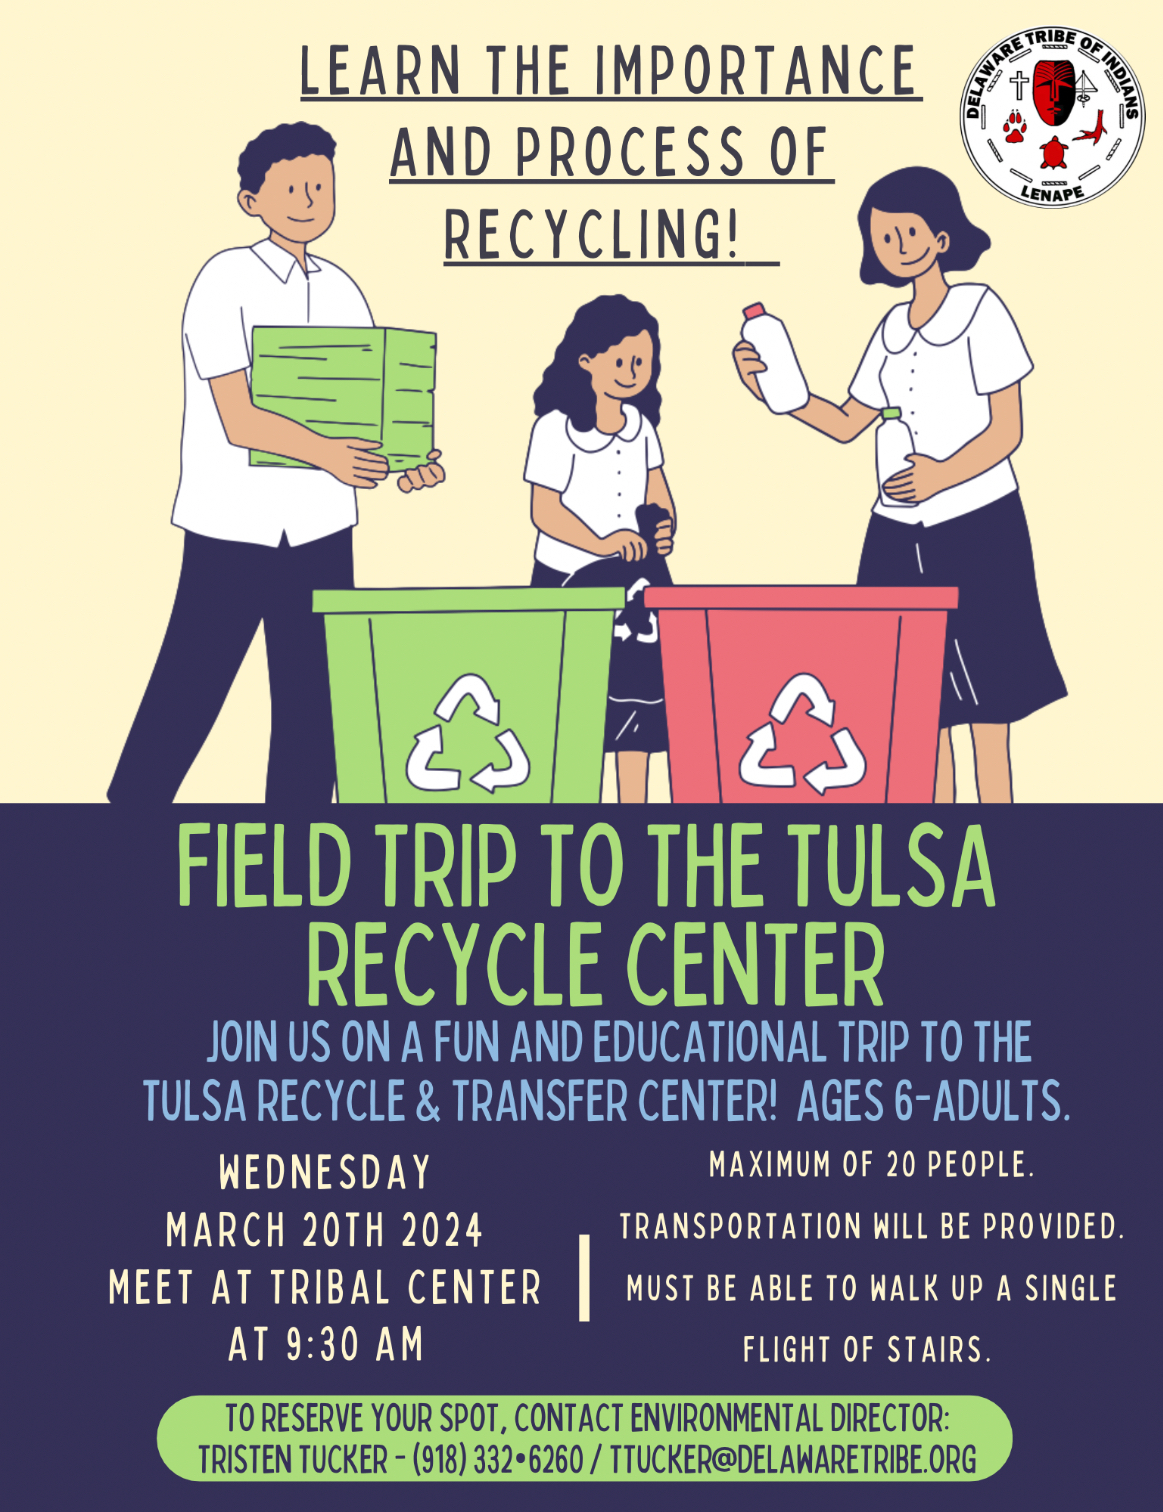 Join us on a fun and educational trip to the Tulsa Recycle & Transfer Center on March 20, 2024! This trip is open to ages 6+, and participants must be able to walk up a single flight of stairs. Transportation will be provided at 9:30 A.M. at the Tribal Headquarters the day of the trip. There are only 20 spots available, so contact Environmental Program Director Tristen Tucker by email at ttucker@delawaretribe.org or by phone at (918) 332-6260 to reserve your place. 